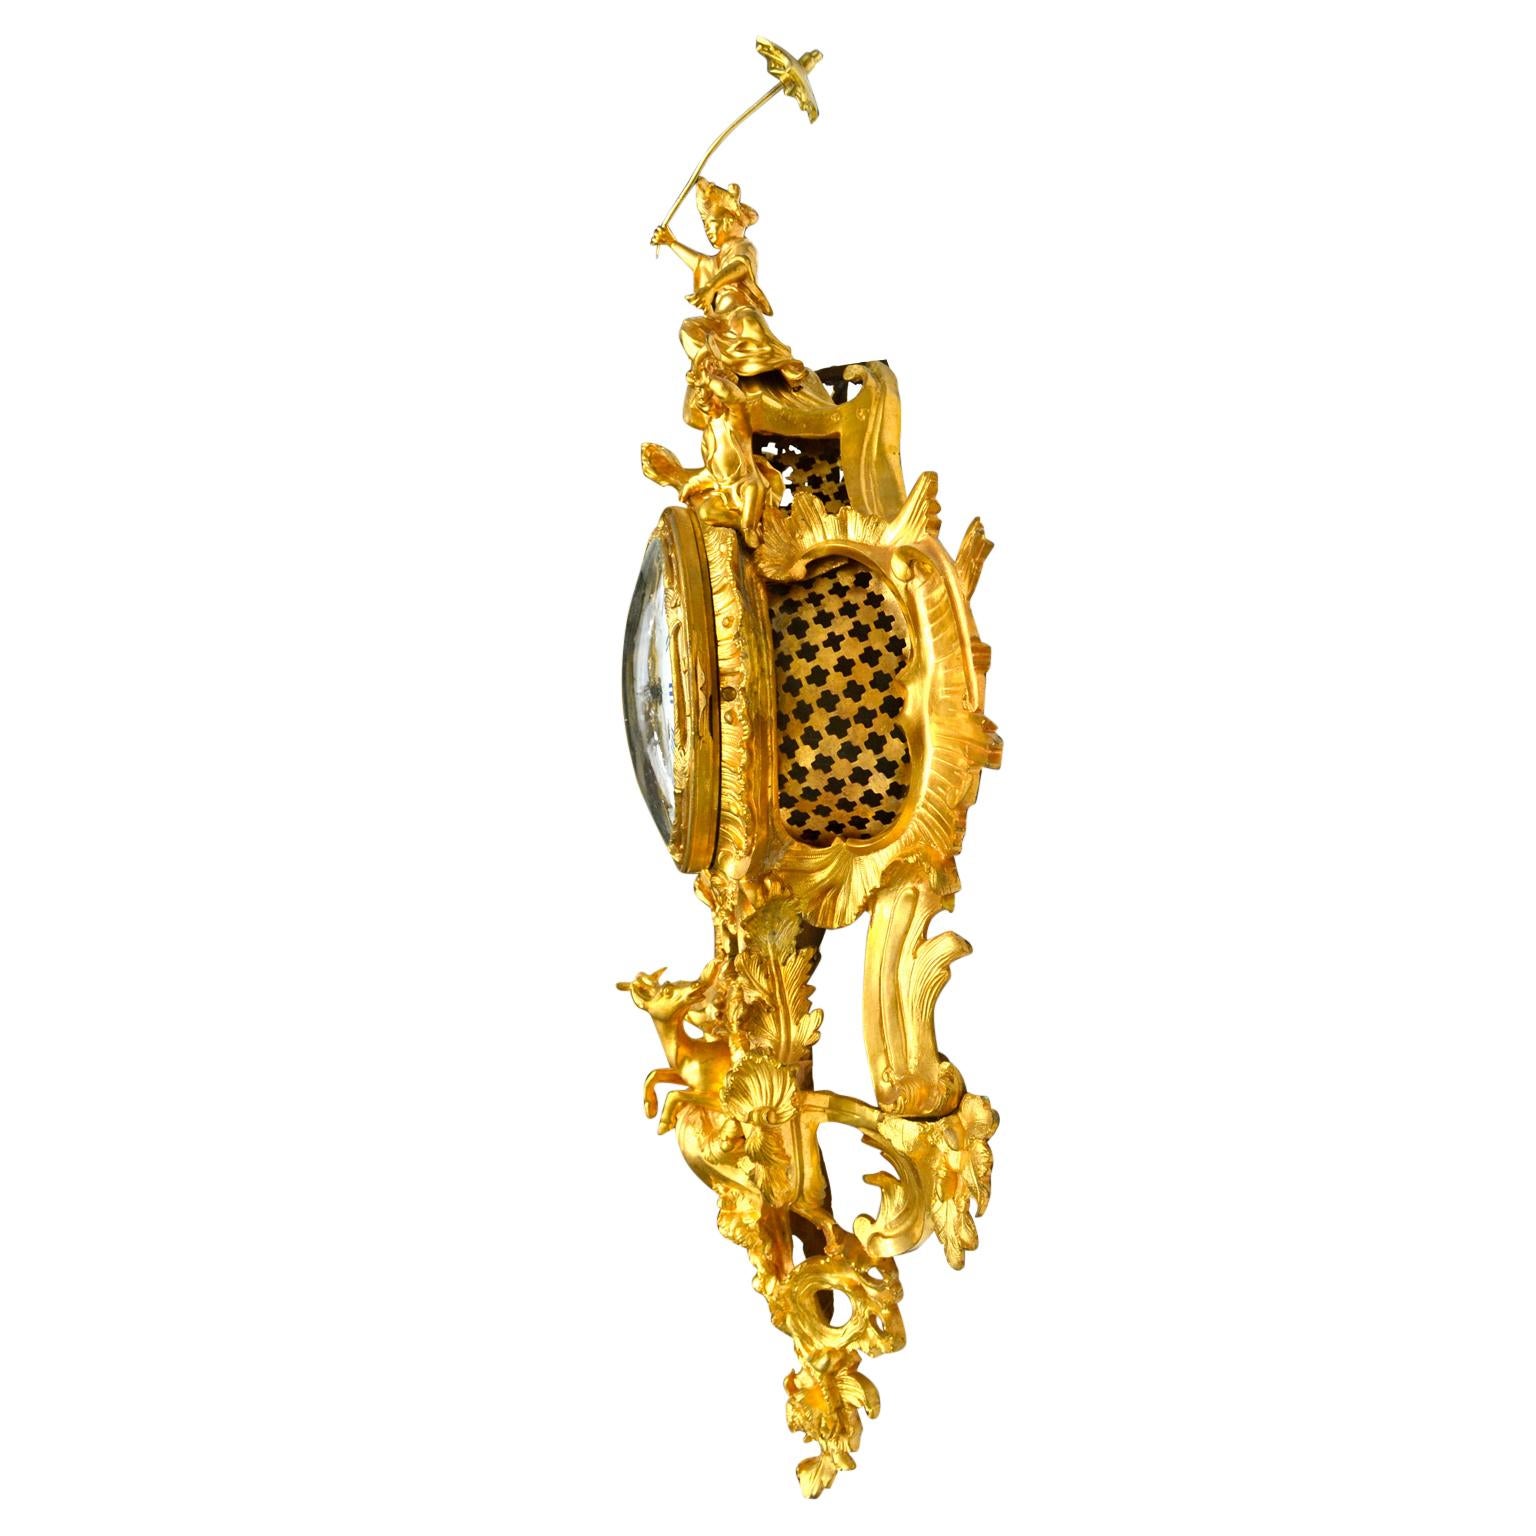 A fine gilded bronze French cartel (wall clock) in the Louis XV rococo style. A Chinese figure sits atop the clock case holding an umbrella aloft, a young child to one side of her, a seated dog on the other. Rocaille work, shells, flowers, sun's